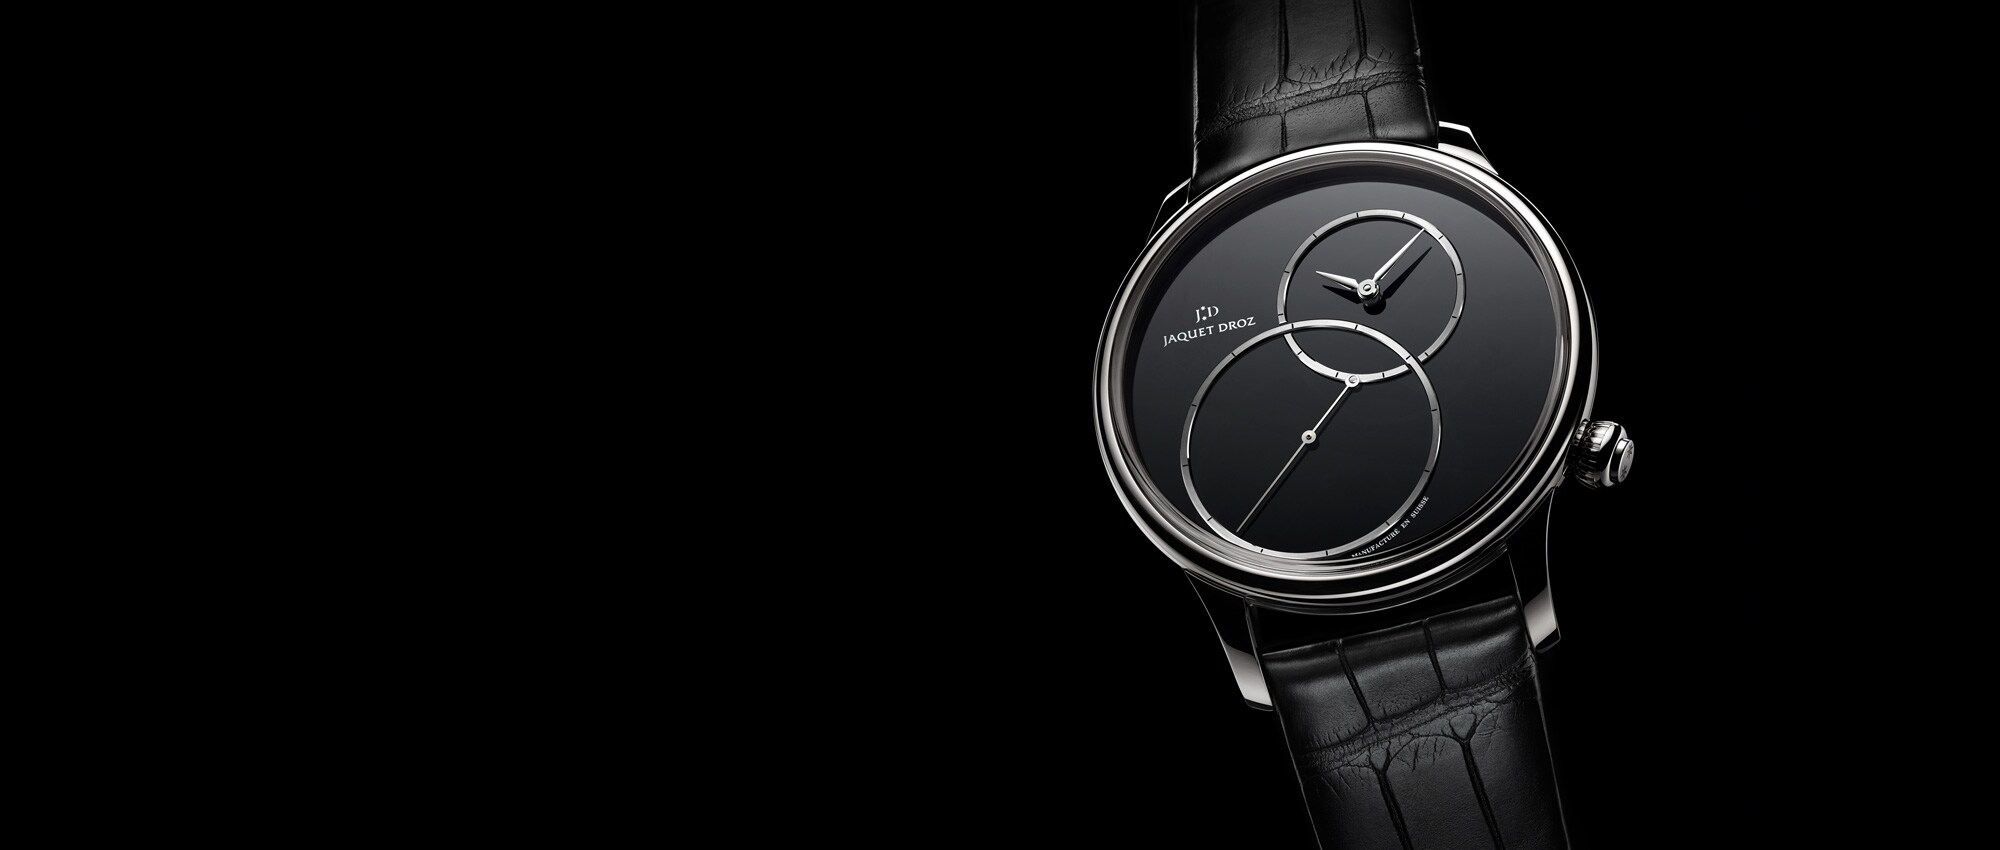 Baselworld 2016 Preview: Grande Seconde Off-Centered Onyx, the essence of blackAnteprima Baselworld 2016: Grande Seconde Off-Centered, l’essenza del nero 